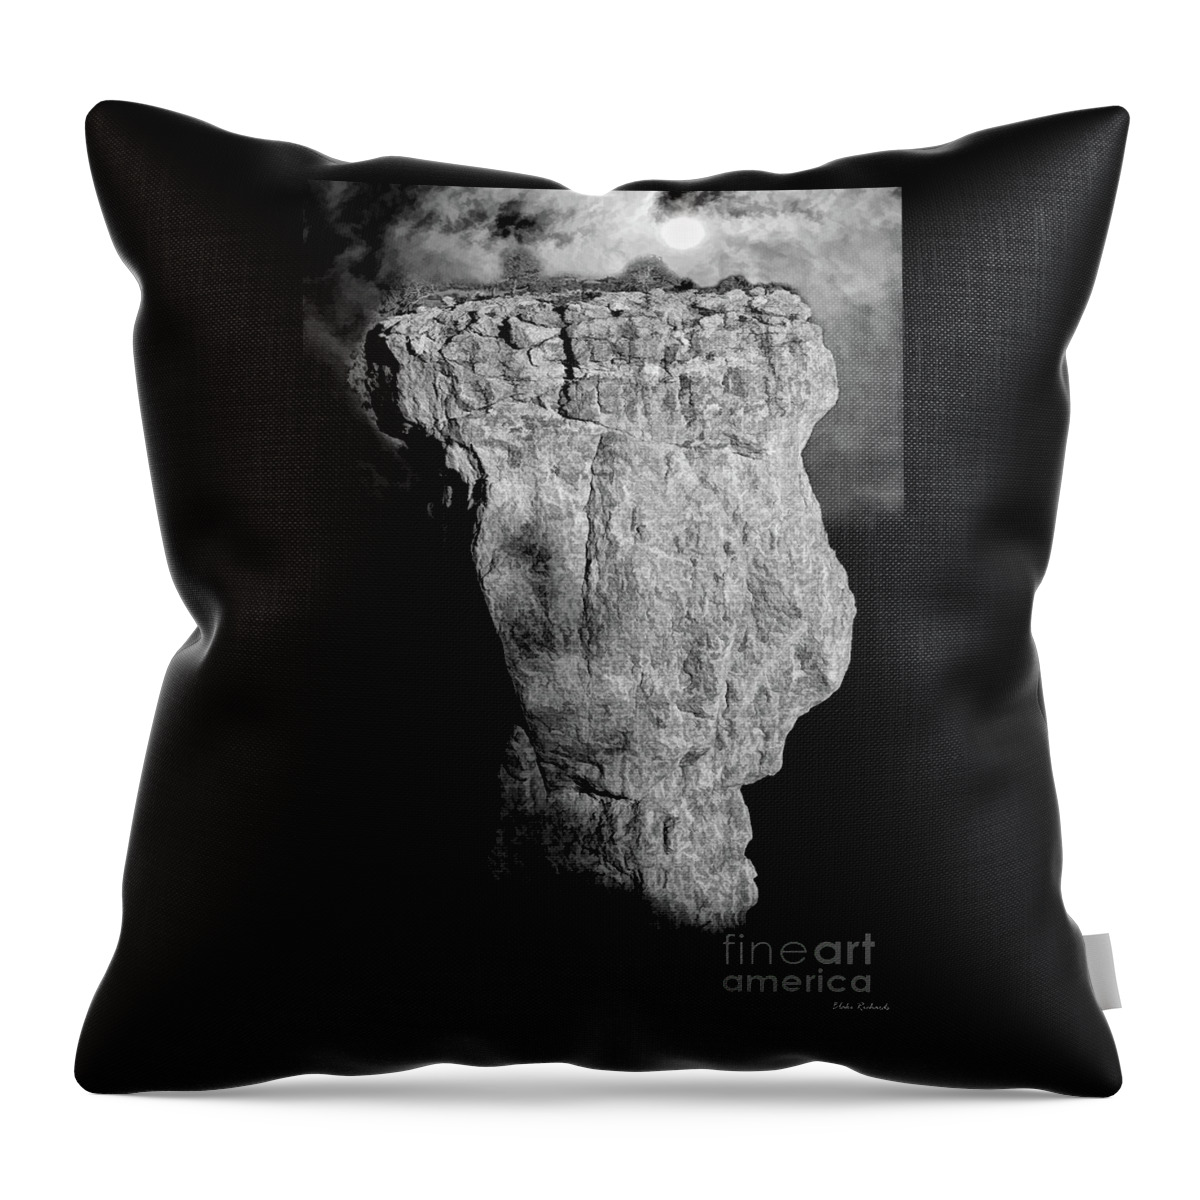  Throw Pillow featuring the photograph Spooky Bryce Canyon by Blake Richards